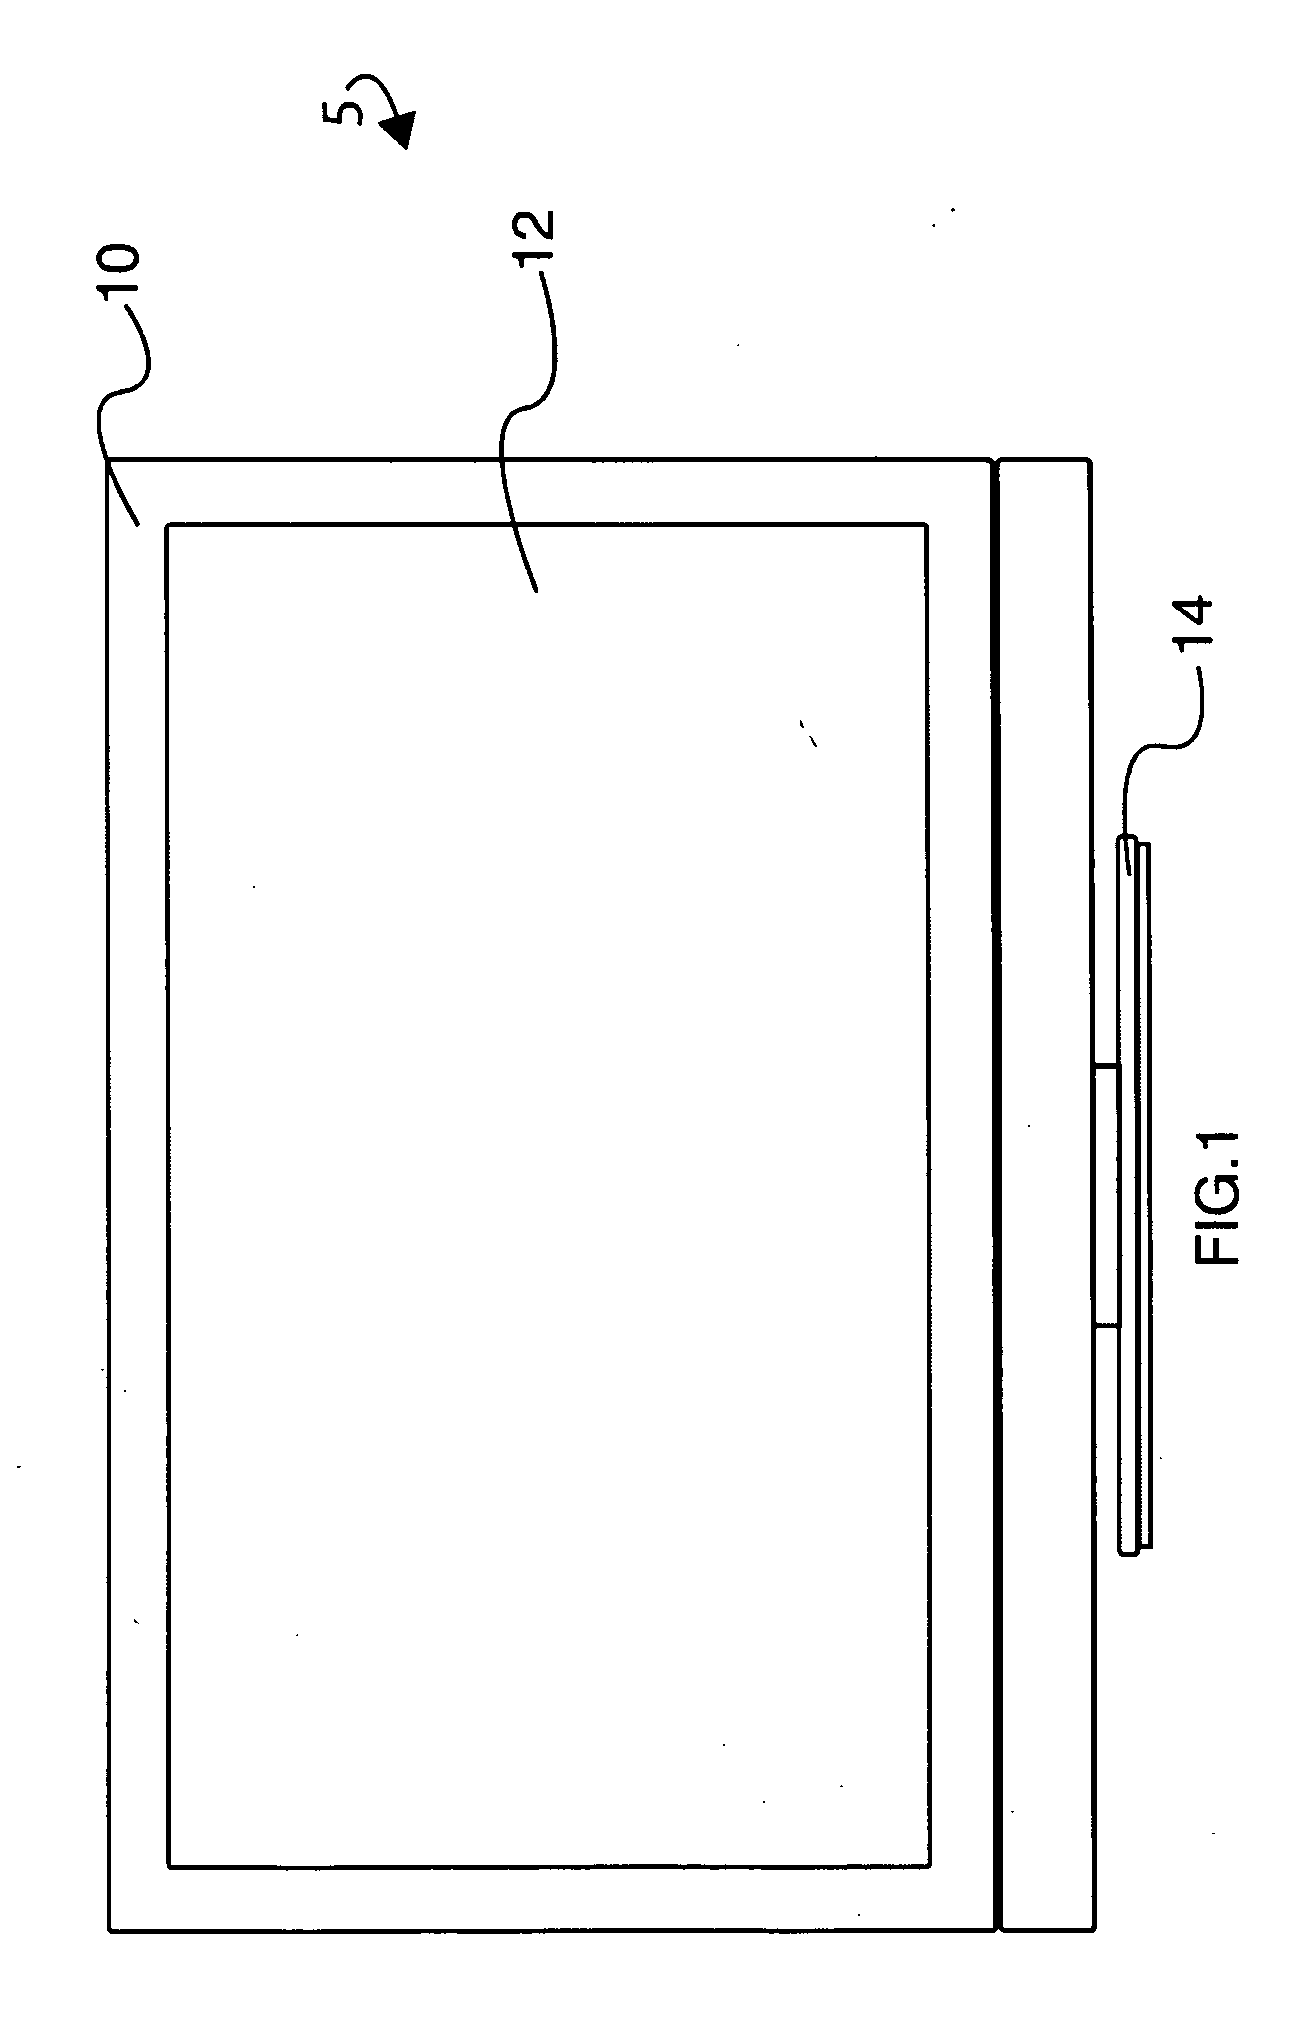 System, method and apparatus for illuminating a bezel